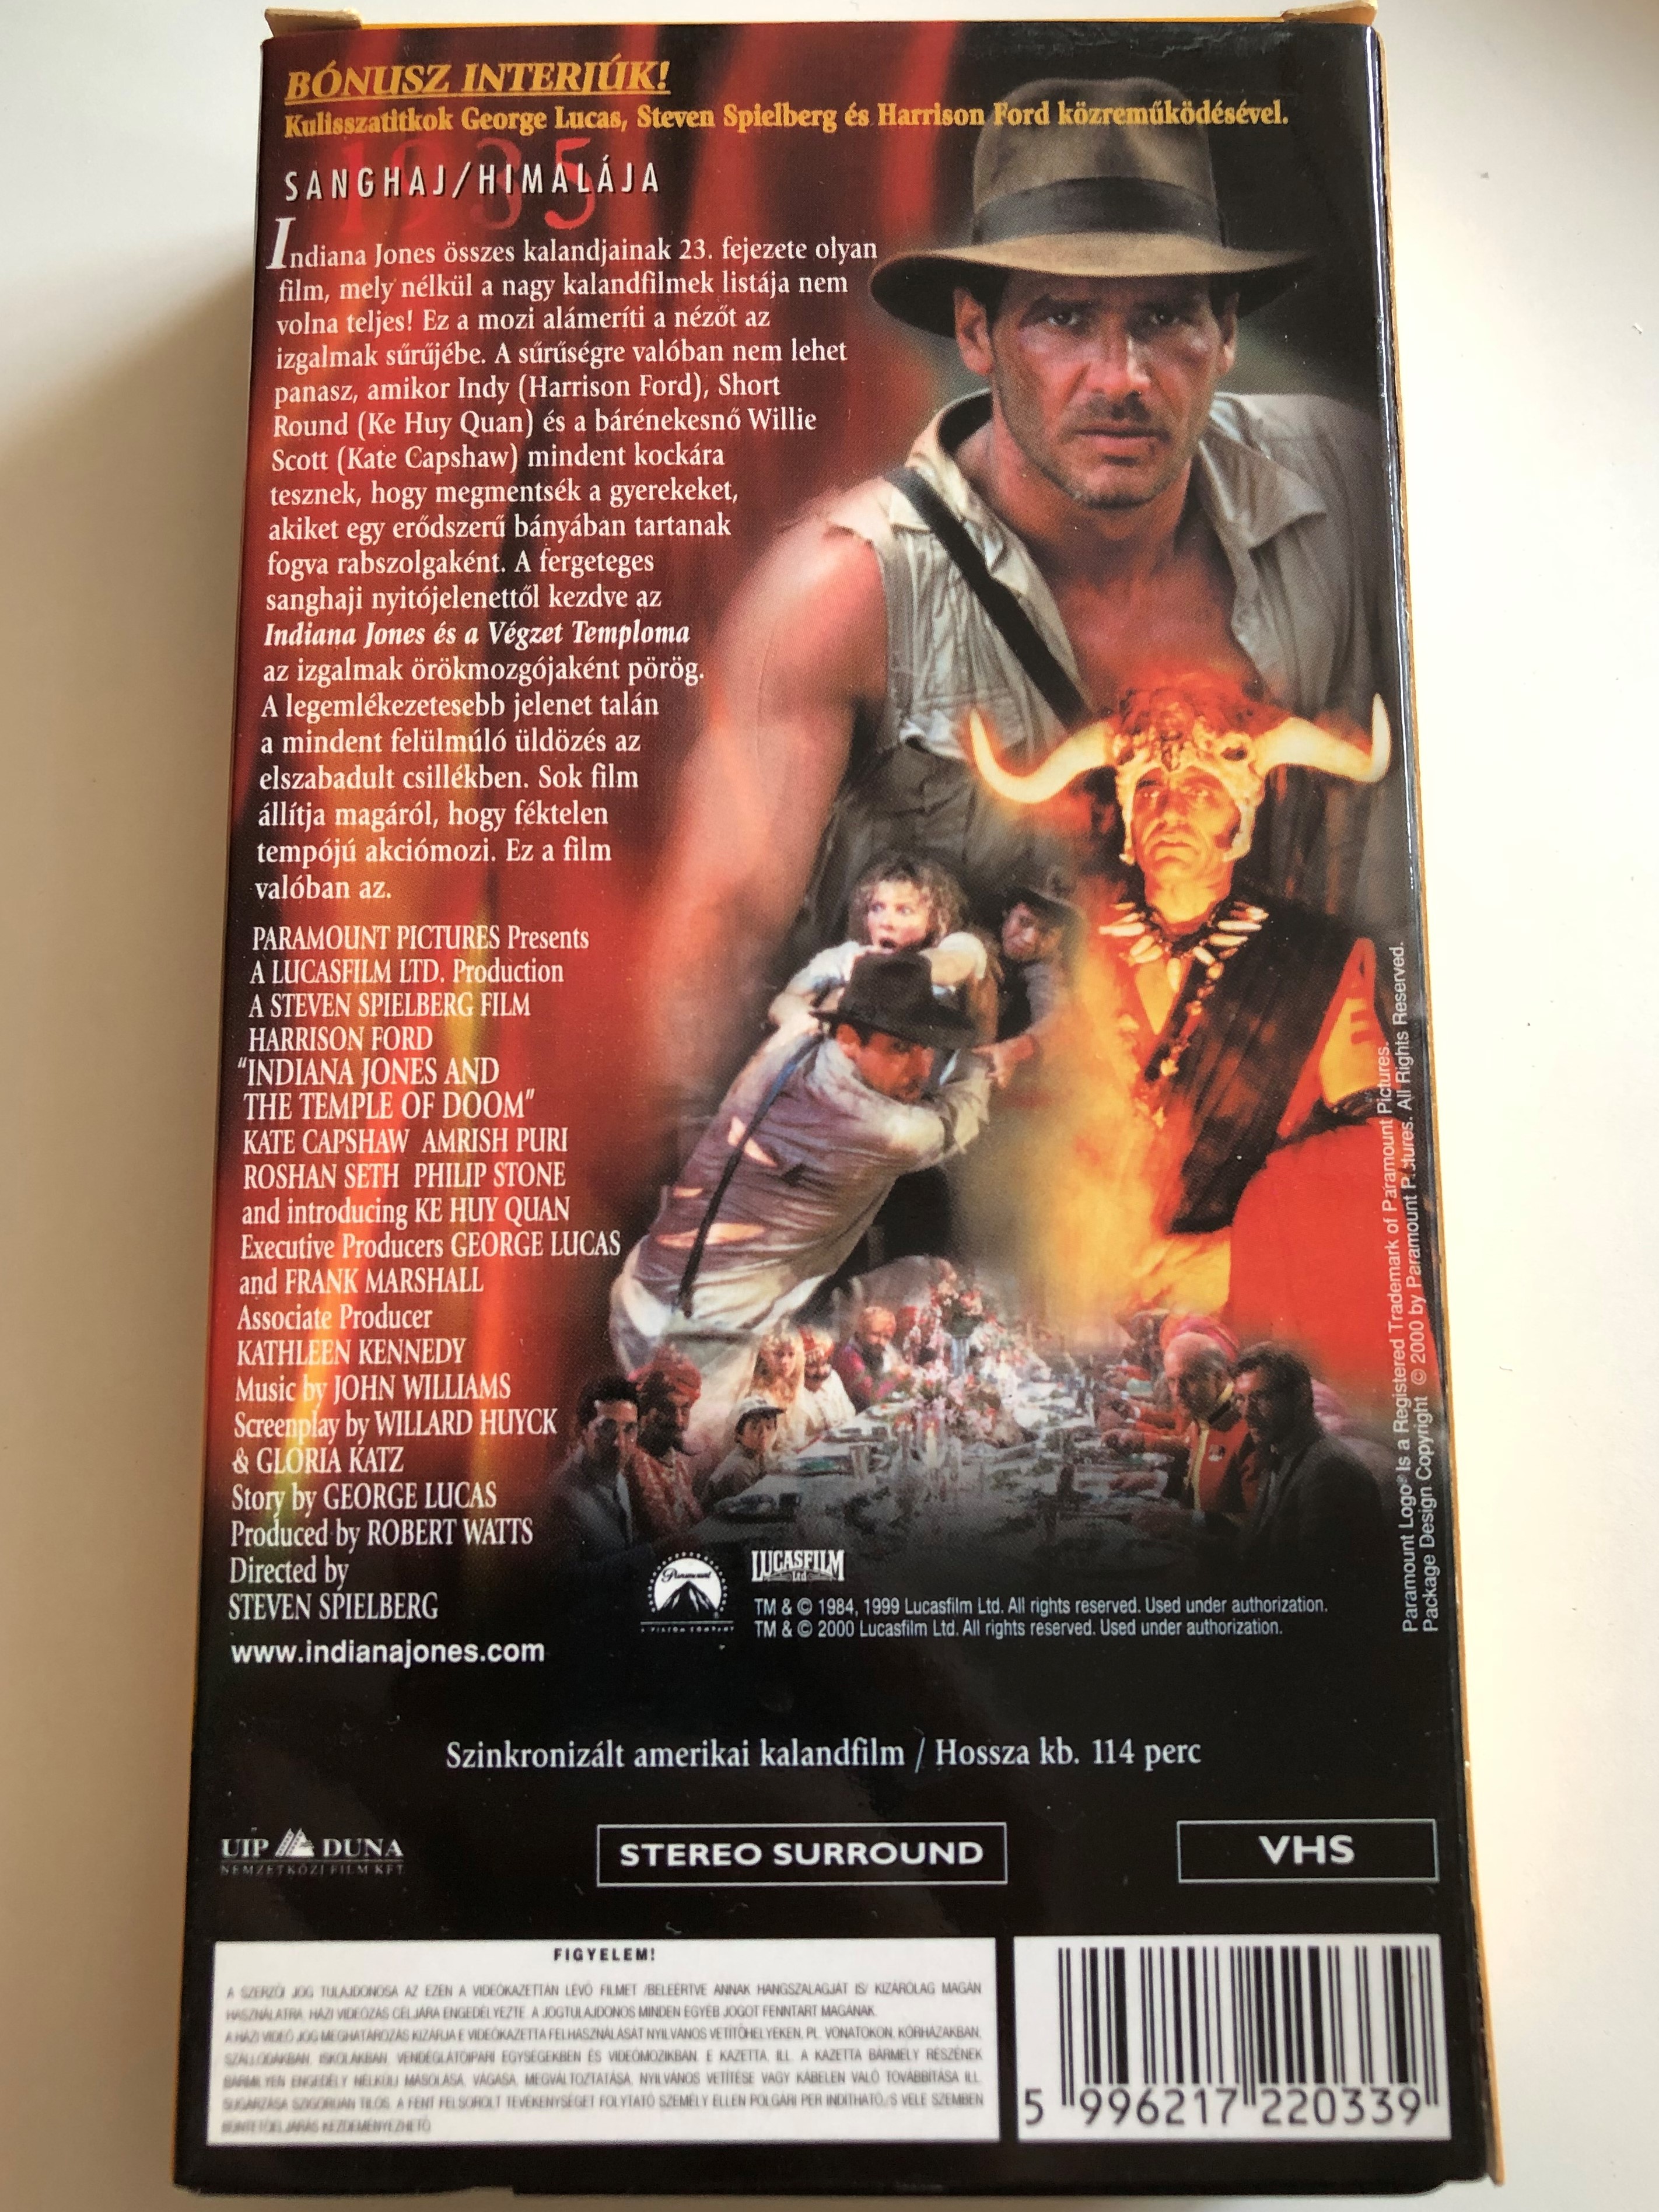 indiana-jones-and-the-temple-of-doom-vhs-1984-indiana-jones-s-a-v-gzet-temploma-directed-by-steven-spielberg-starring-harrison-ford-cate-capshaw-amrish-puri-jonathan-ke-quan-2-.jpg